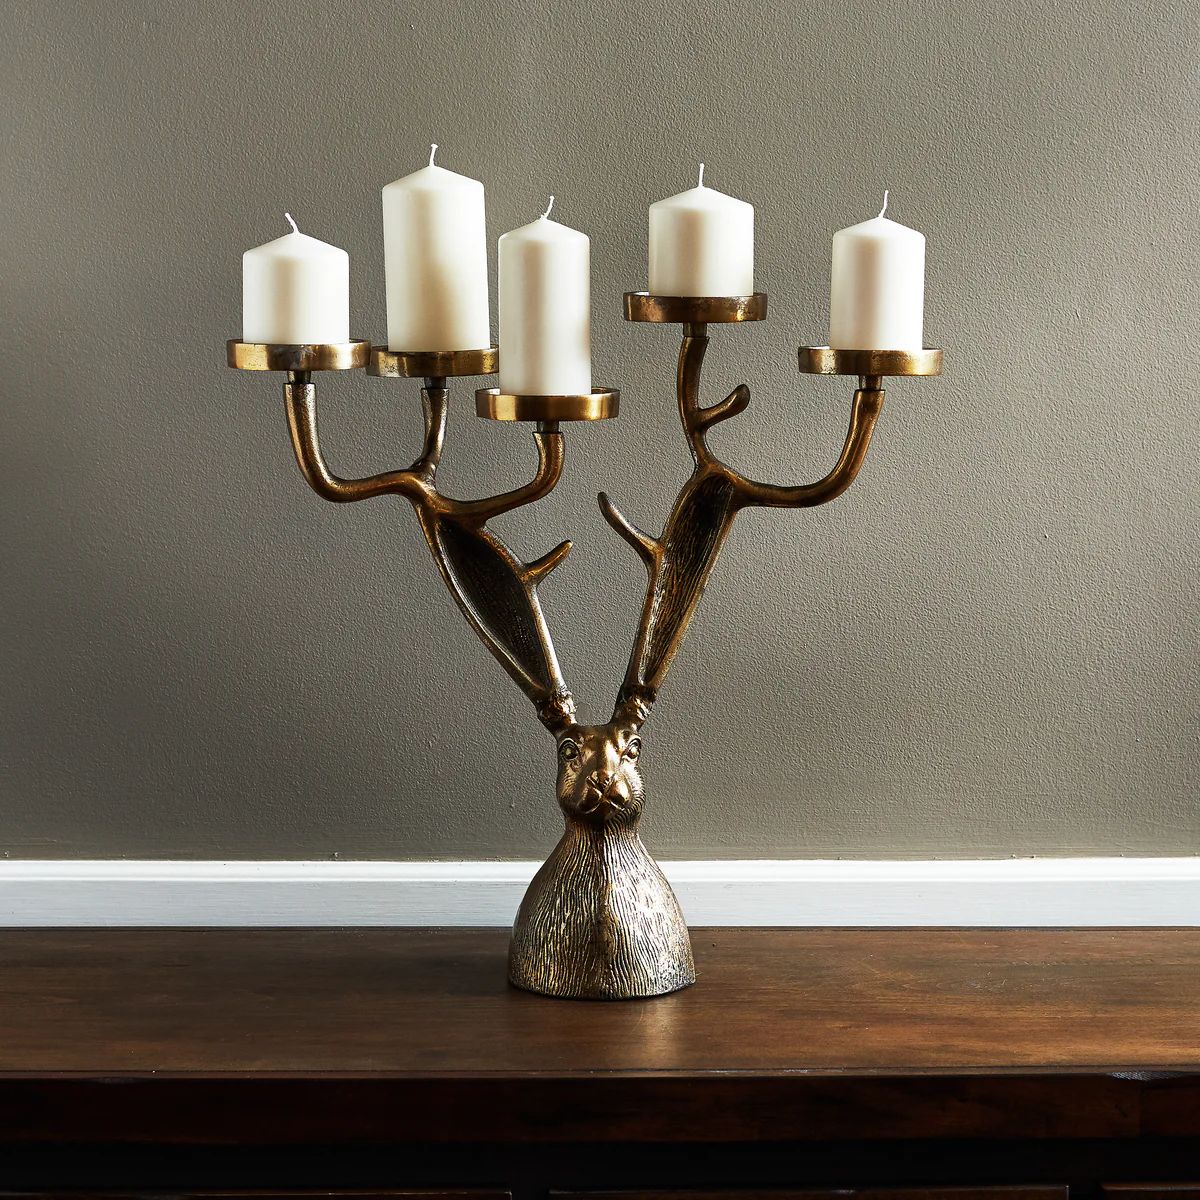 Eric Bronzed Aluminum Candelabra Candle Holder Eric + Eloise Collection | Darby Creek Trading